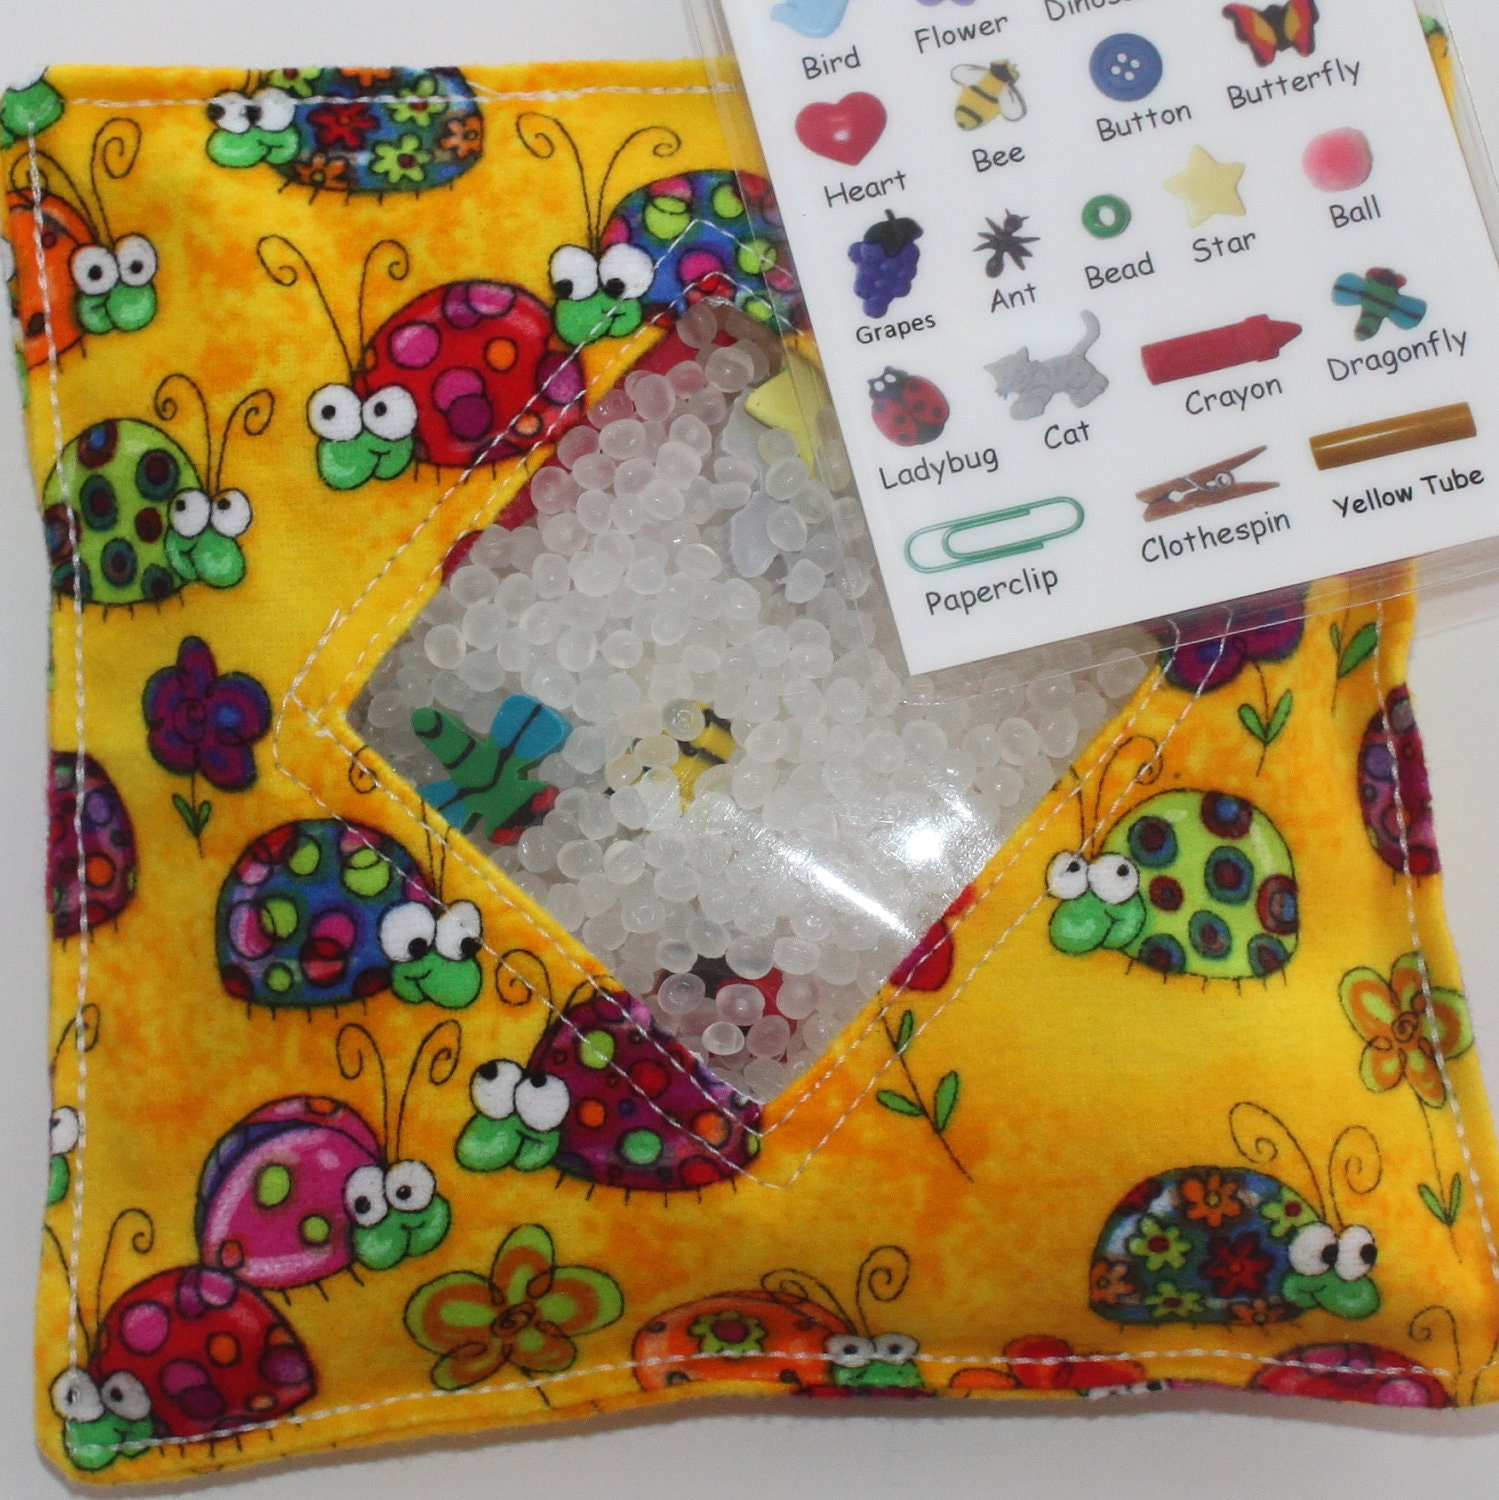 I Spy Bag - BUGABOOS Treasure Hunt with Picture Card - All sales helps support our sports activities and summer camps.